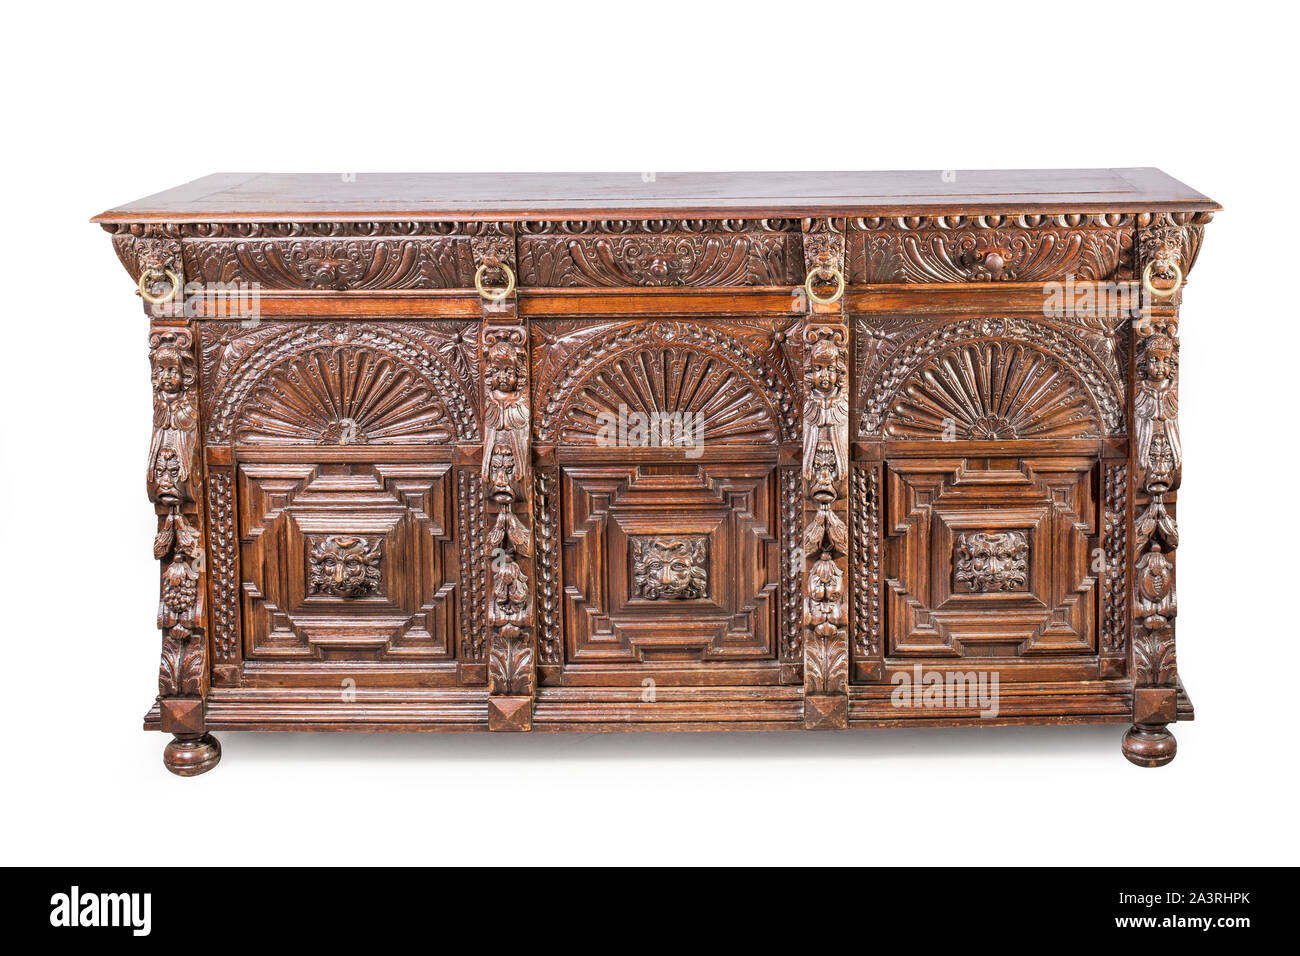 Old grungy wooden chest with beautiful and rich carving decoration. France Stock Photo